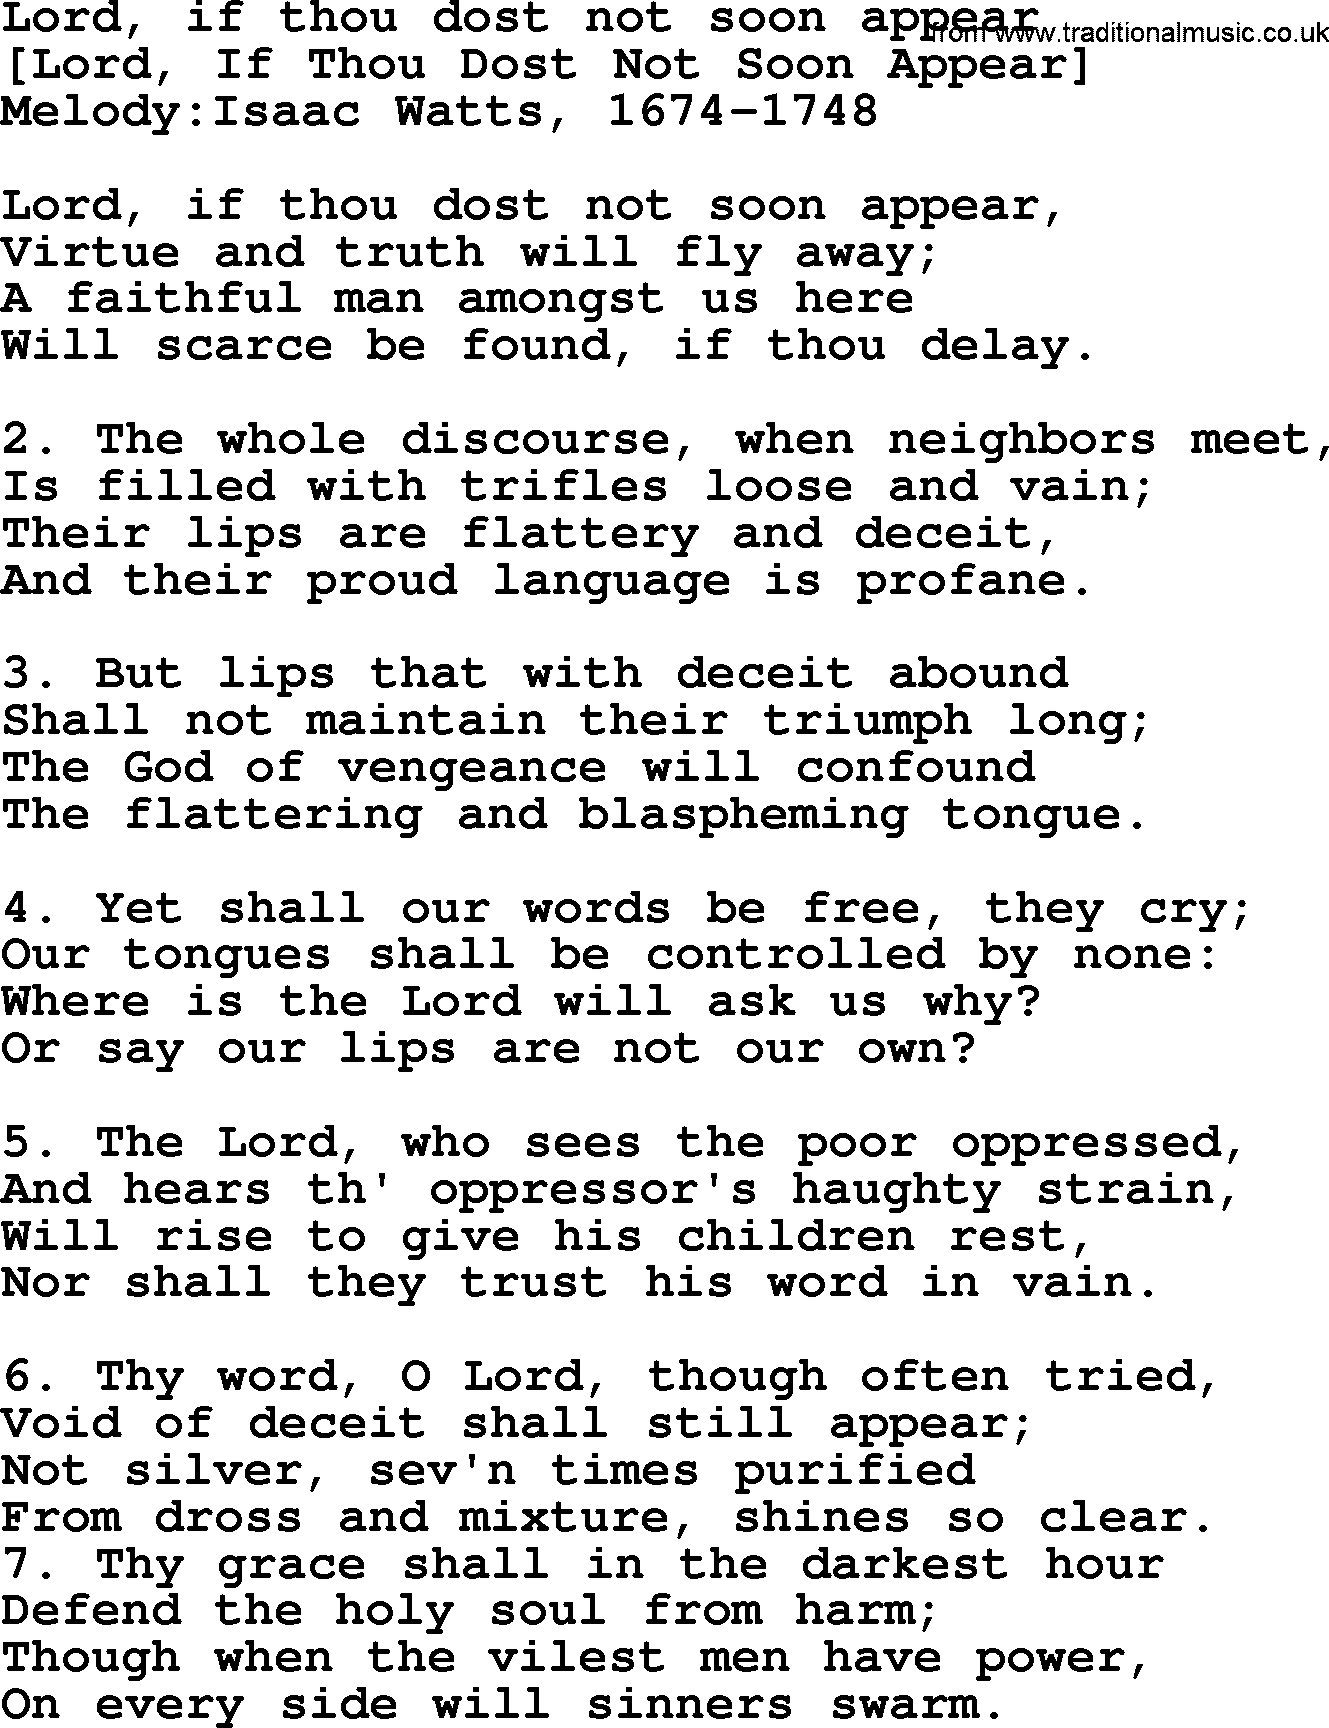 Old English Song: Lord, If Thou Dost Not Soon Appear lyrics